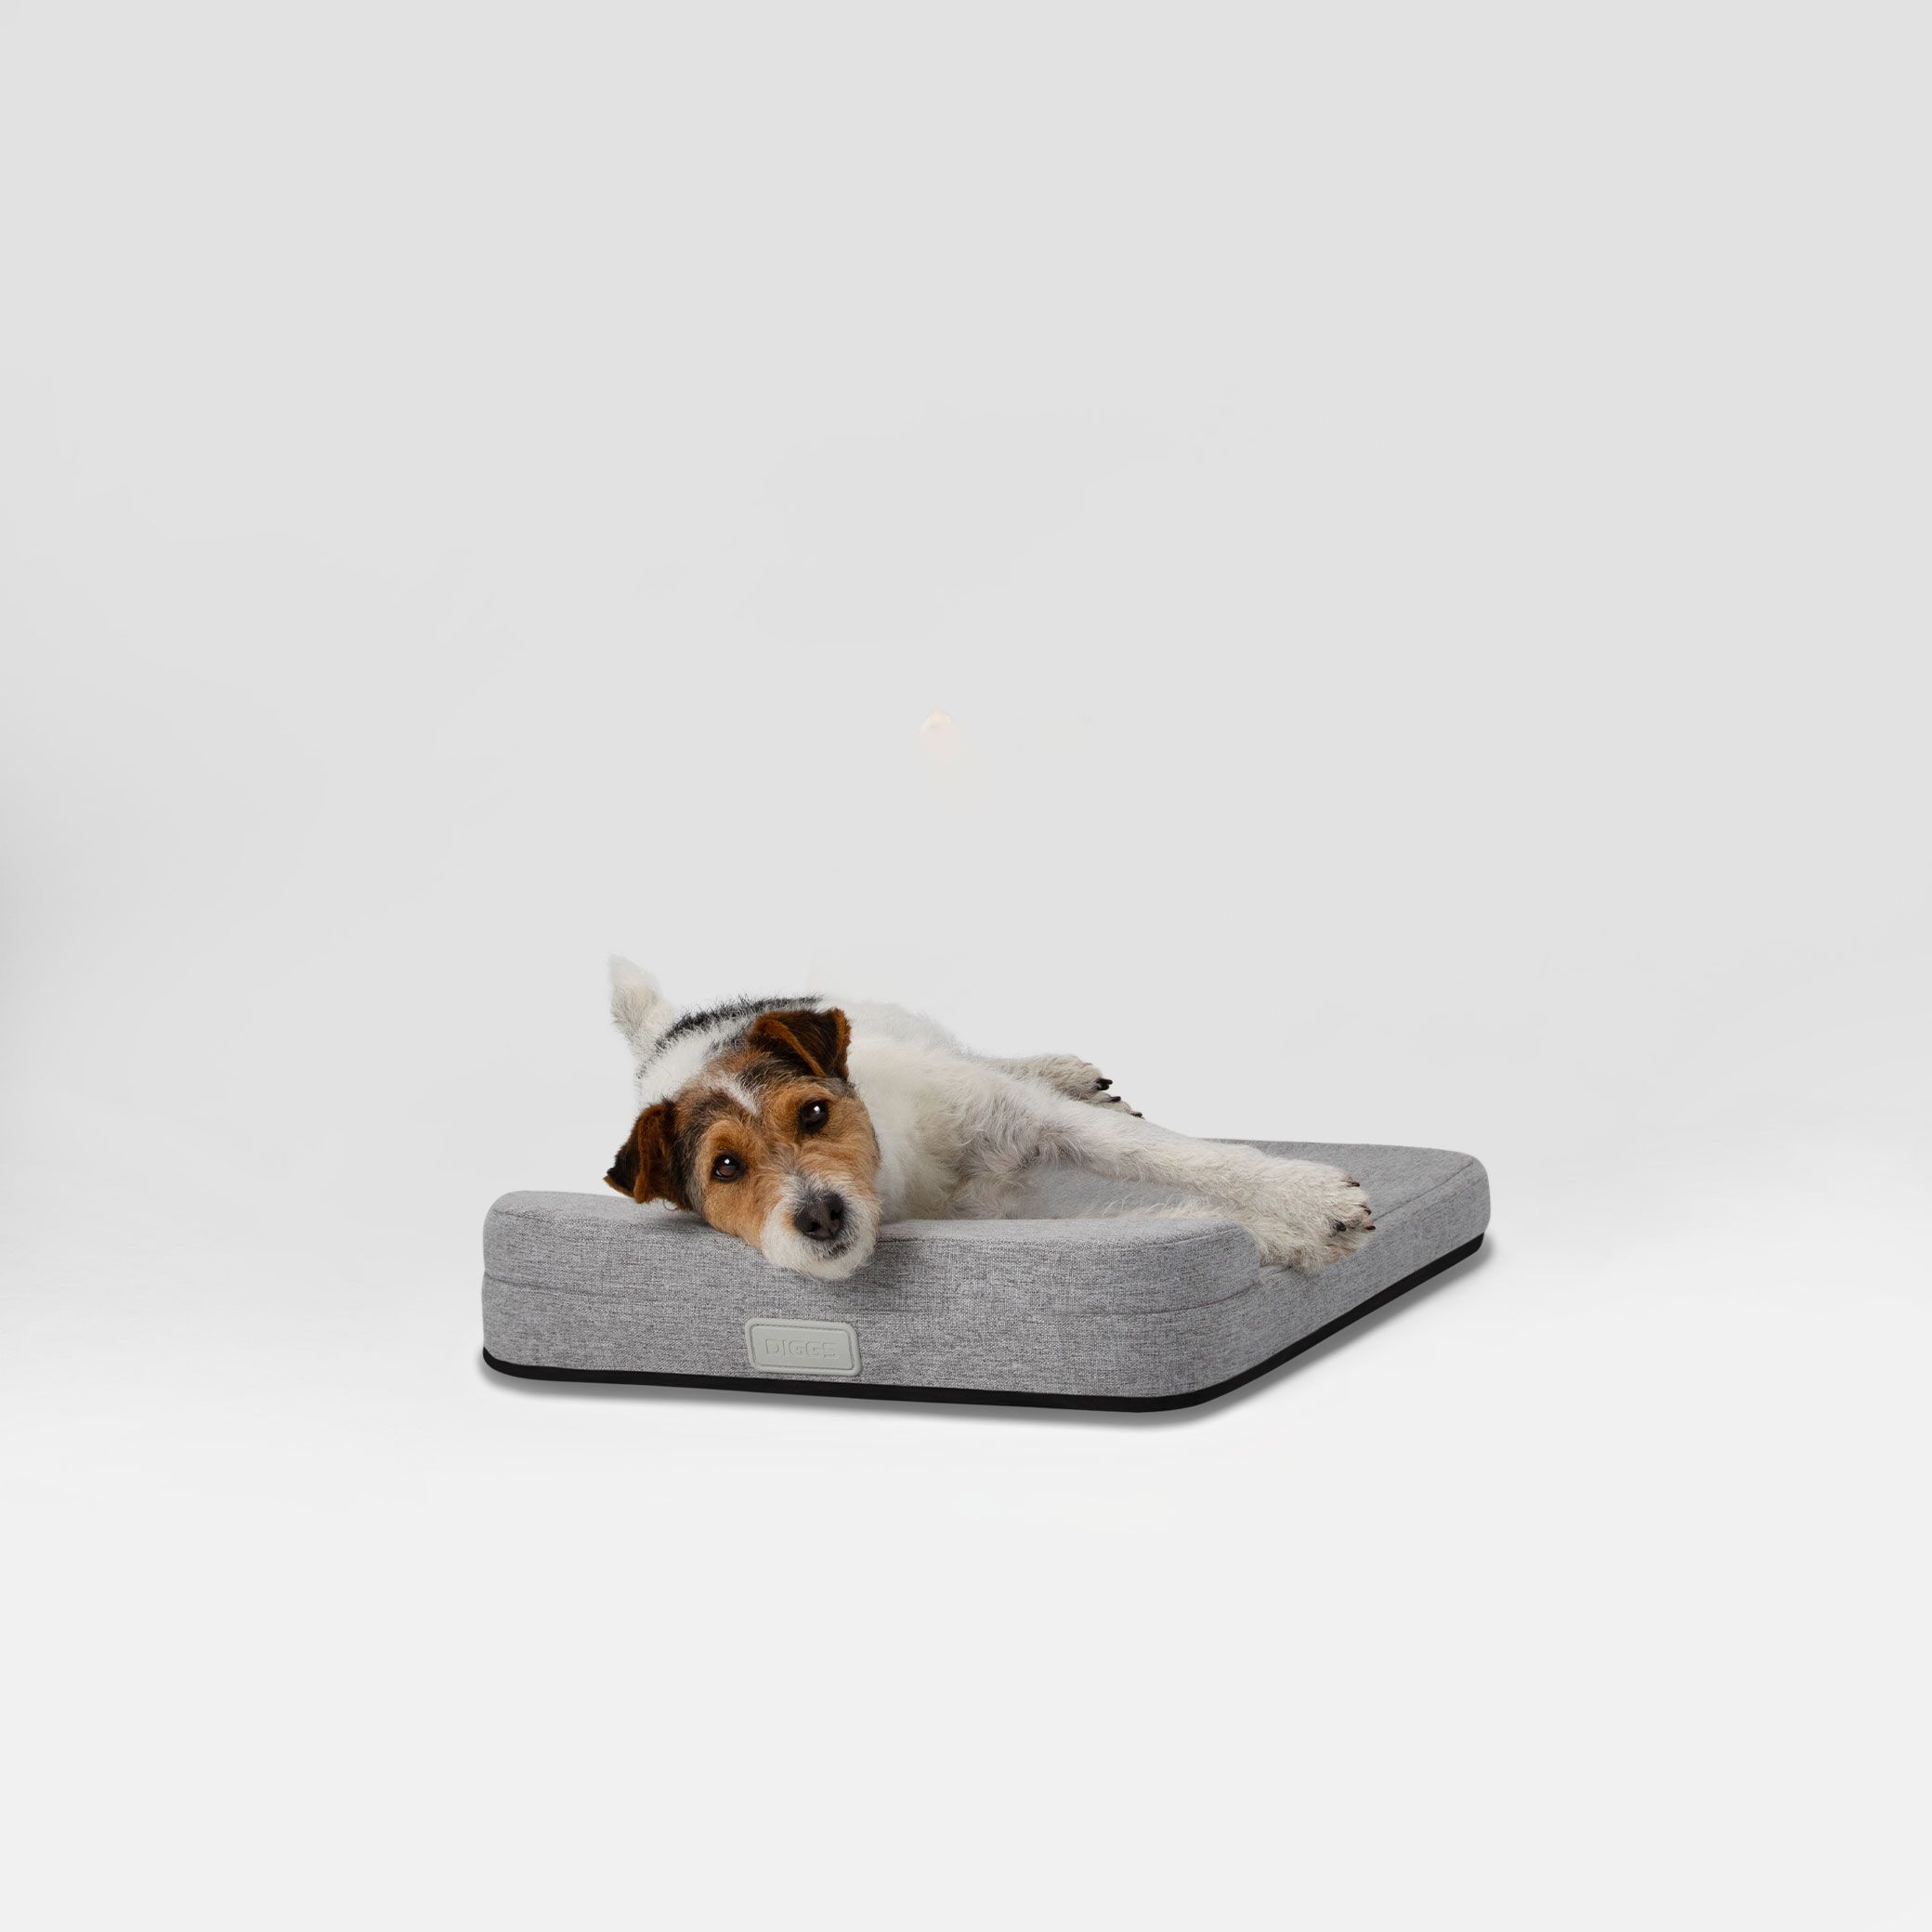 Diagonal view of Bolstr Dog Bed with terrier dog laying and resting head on bolstered headrest,